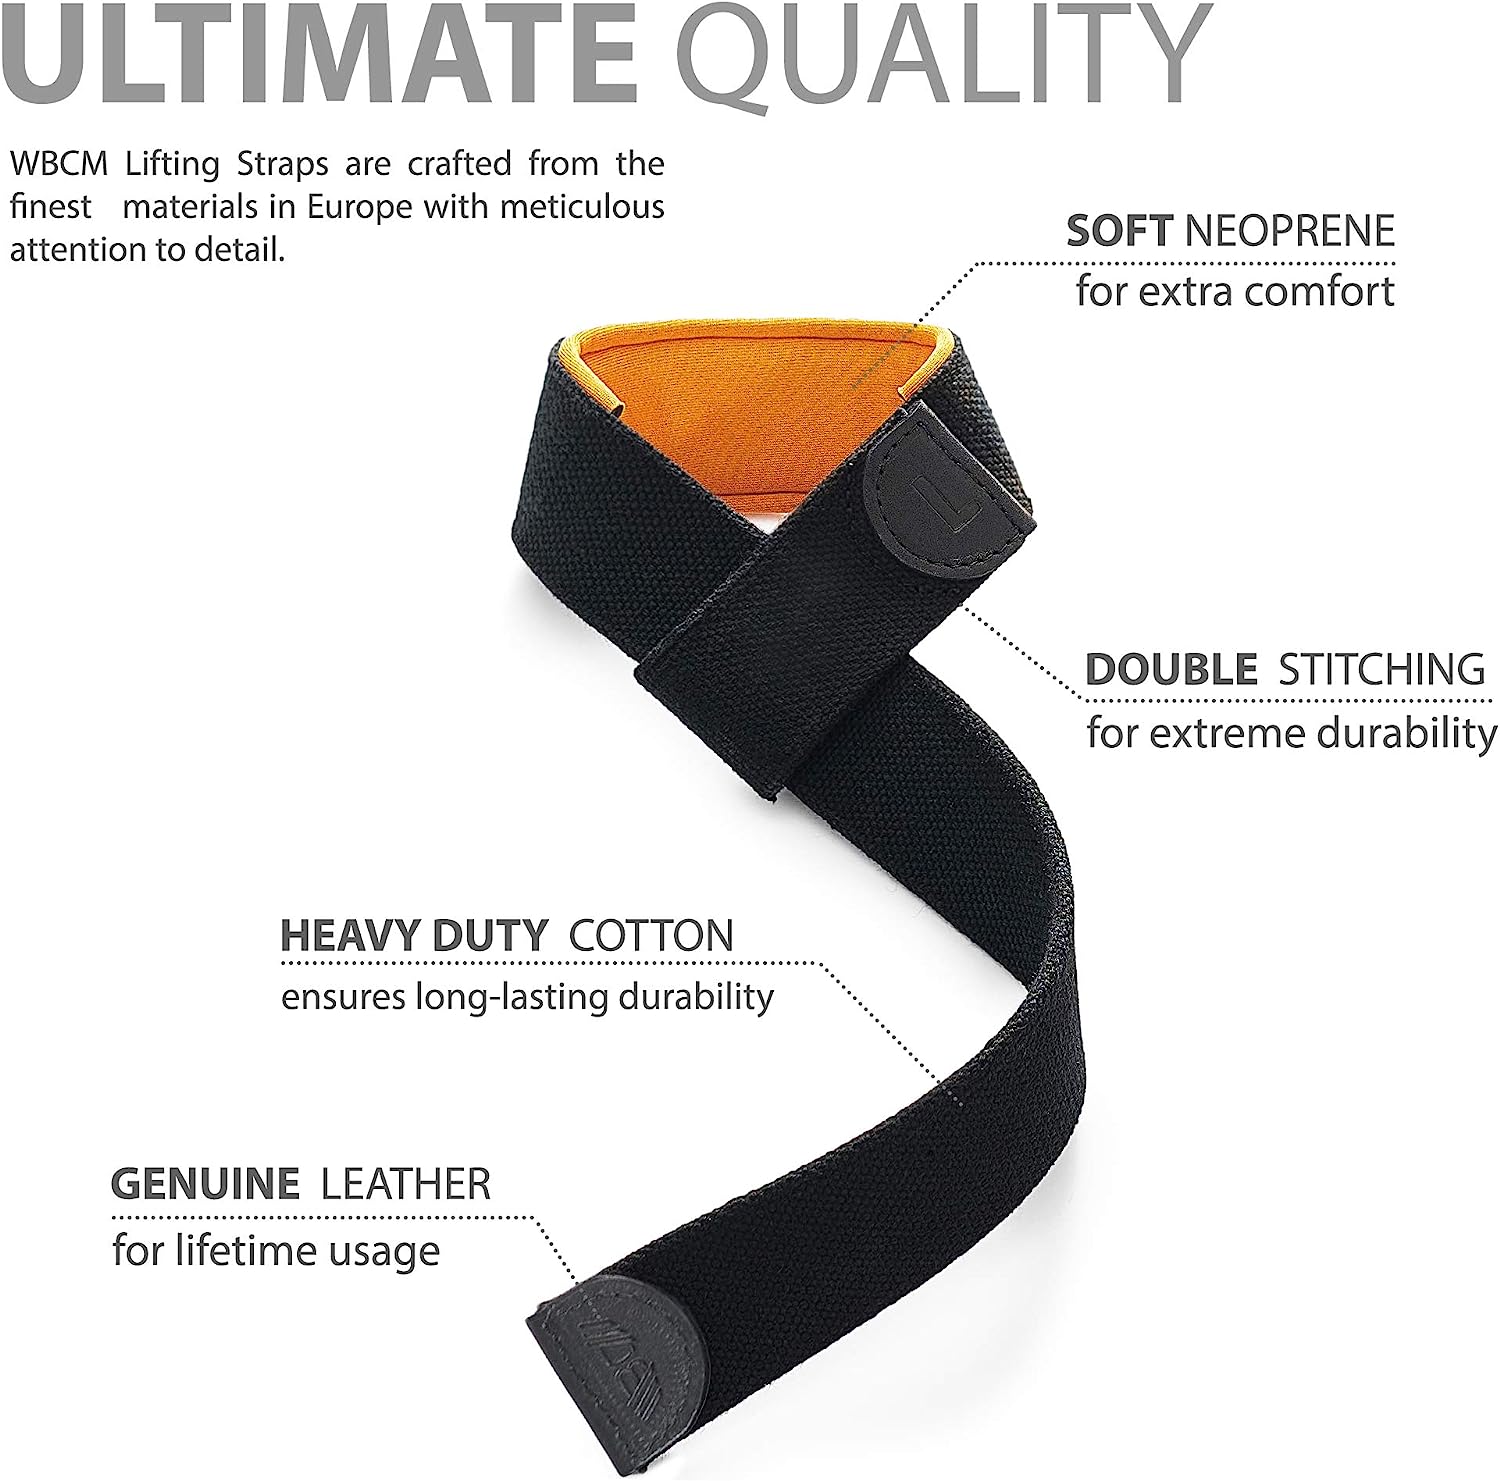 Warm Body Cold Mind Lasso Lifting Wrist Straps for Crossfit, Olympic Weightlifting, Powerlifting, Bodybuilding, Functional Strength Training - Heavy-D